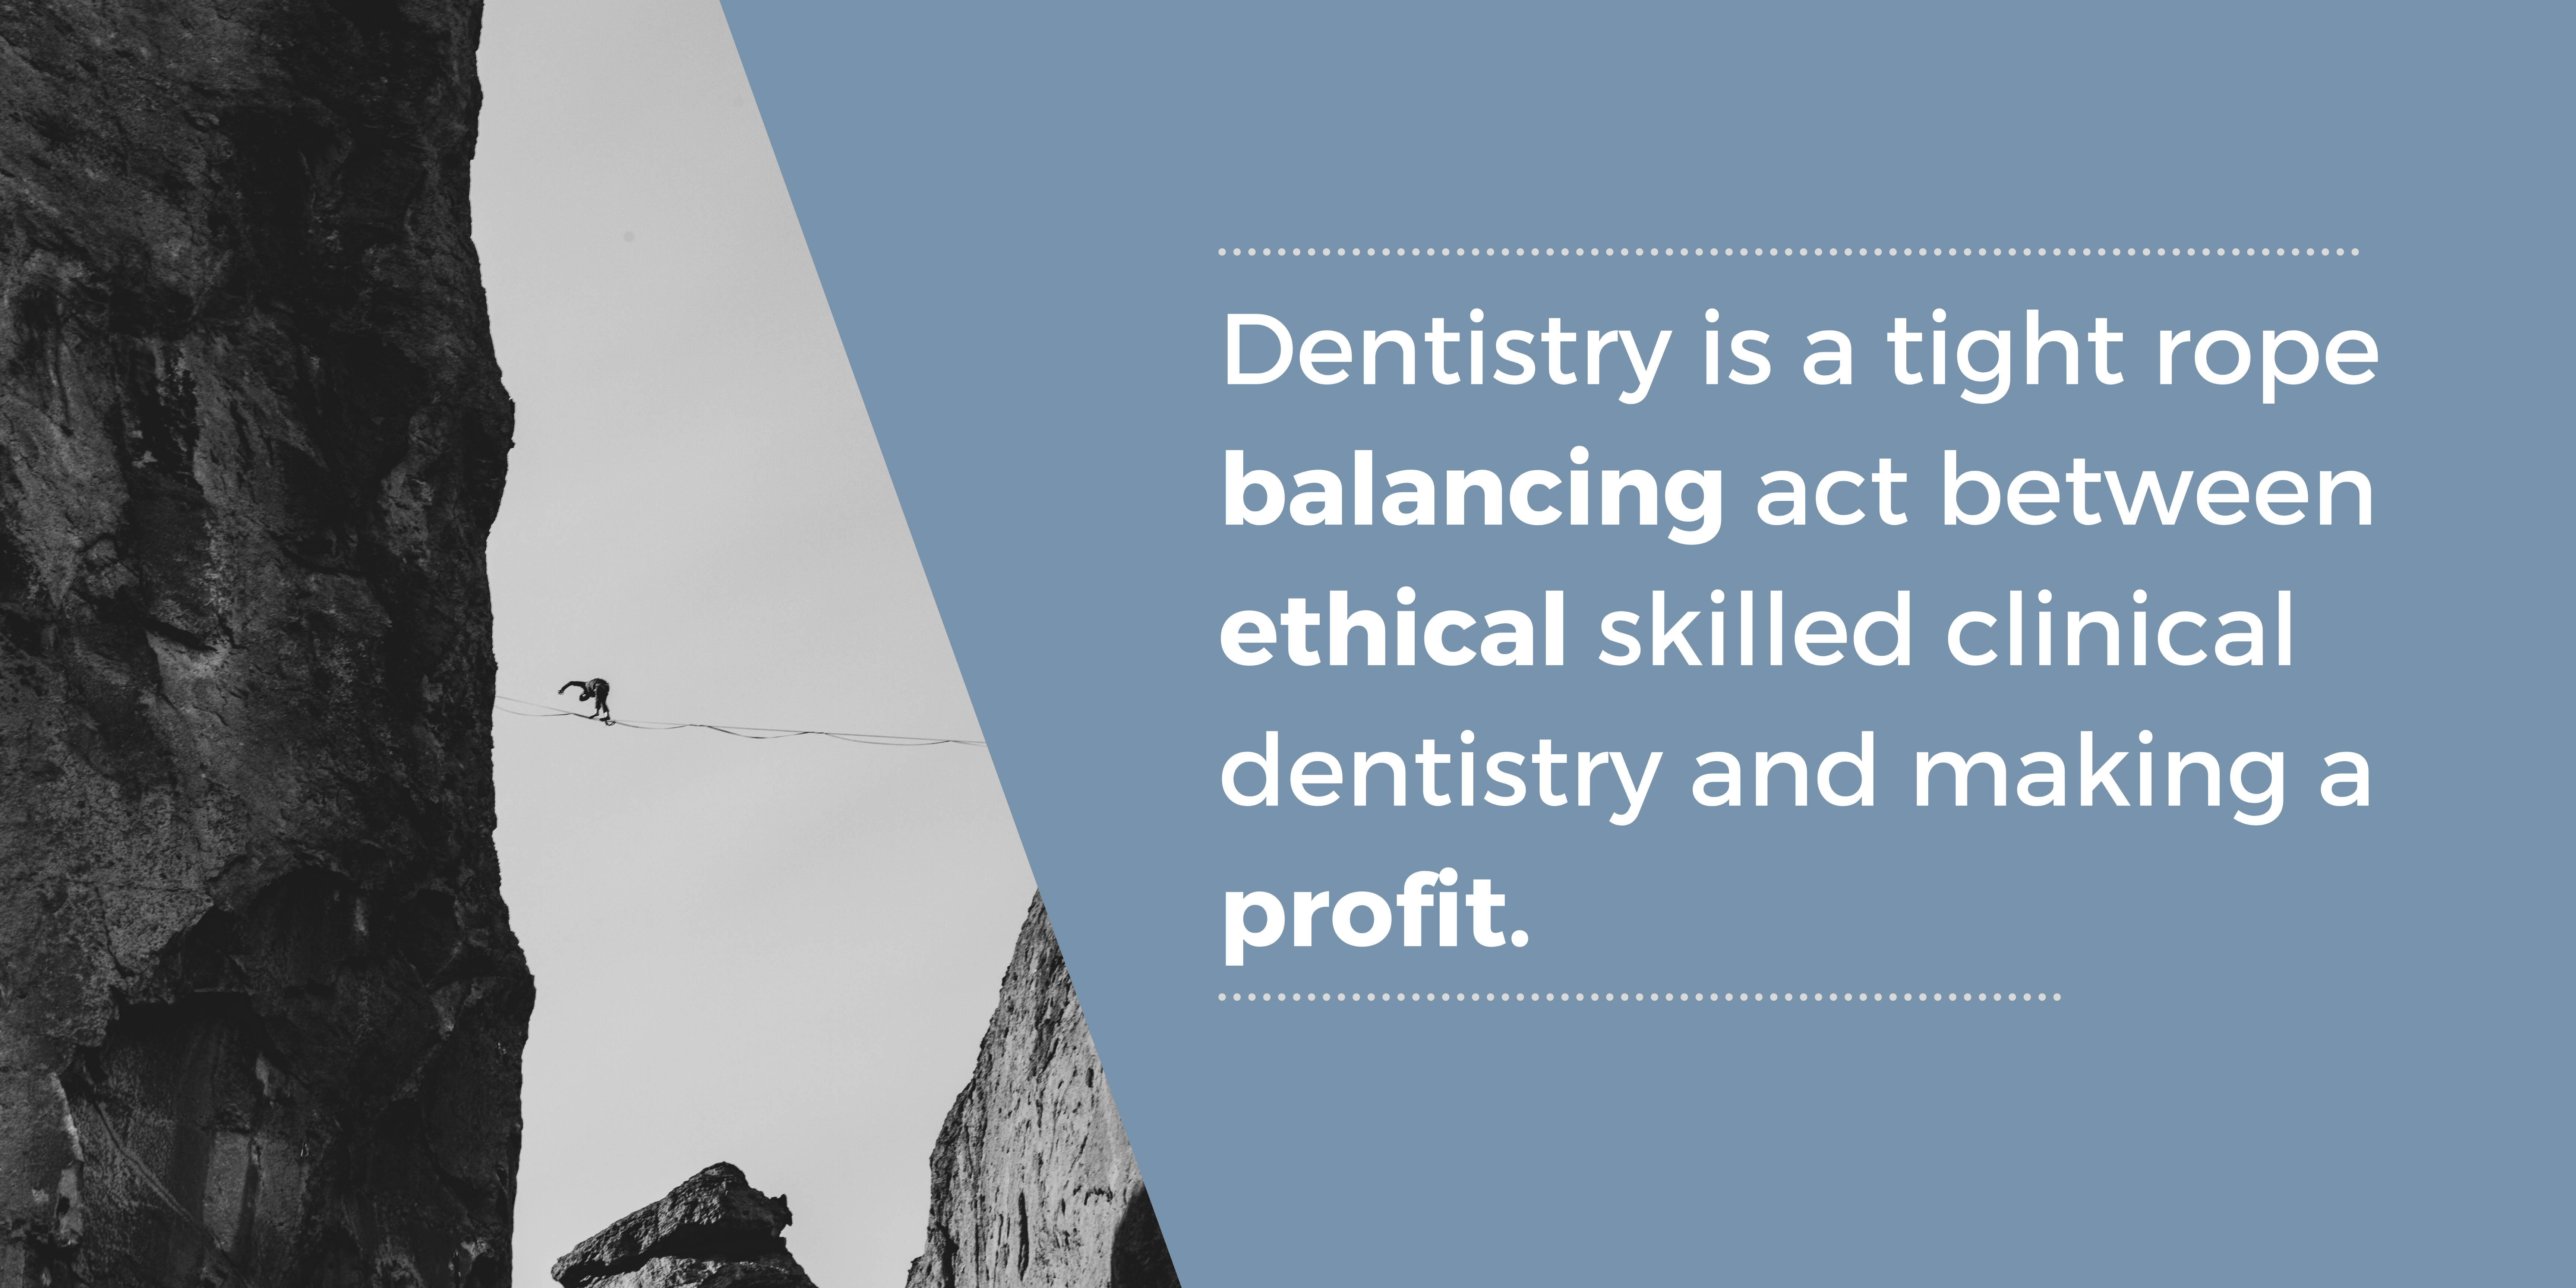 Dentistry is a tight rope balancing act between ethical skilled clinical dentistry and making a profit.